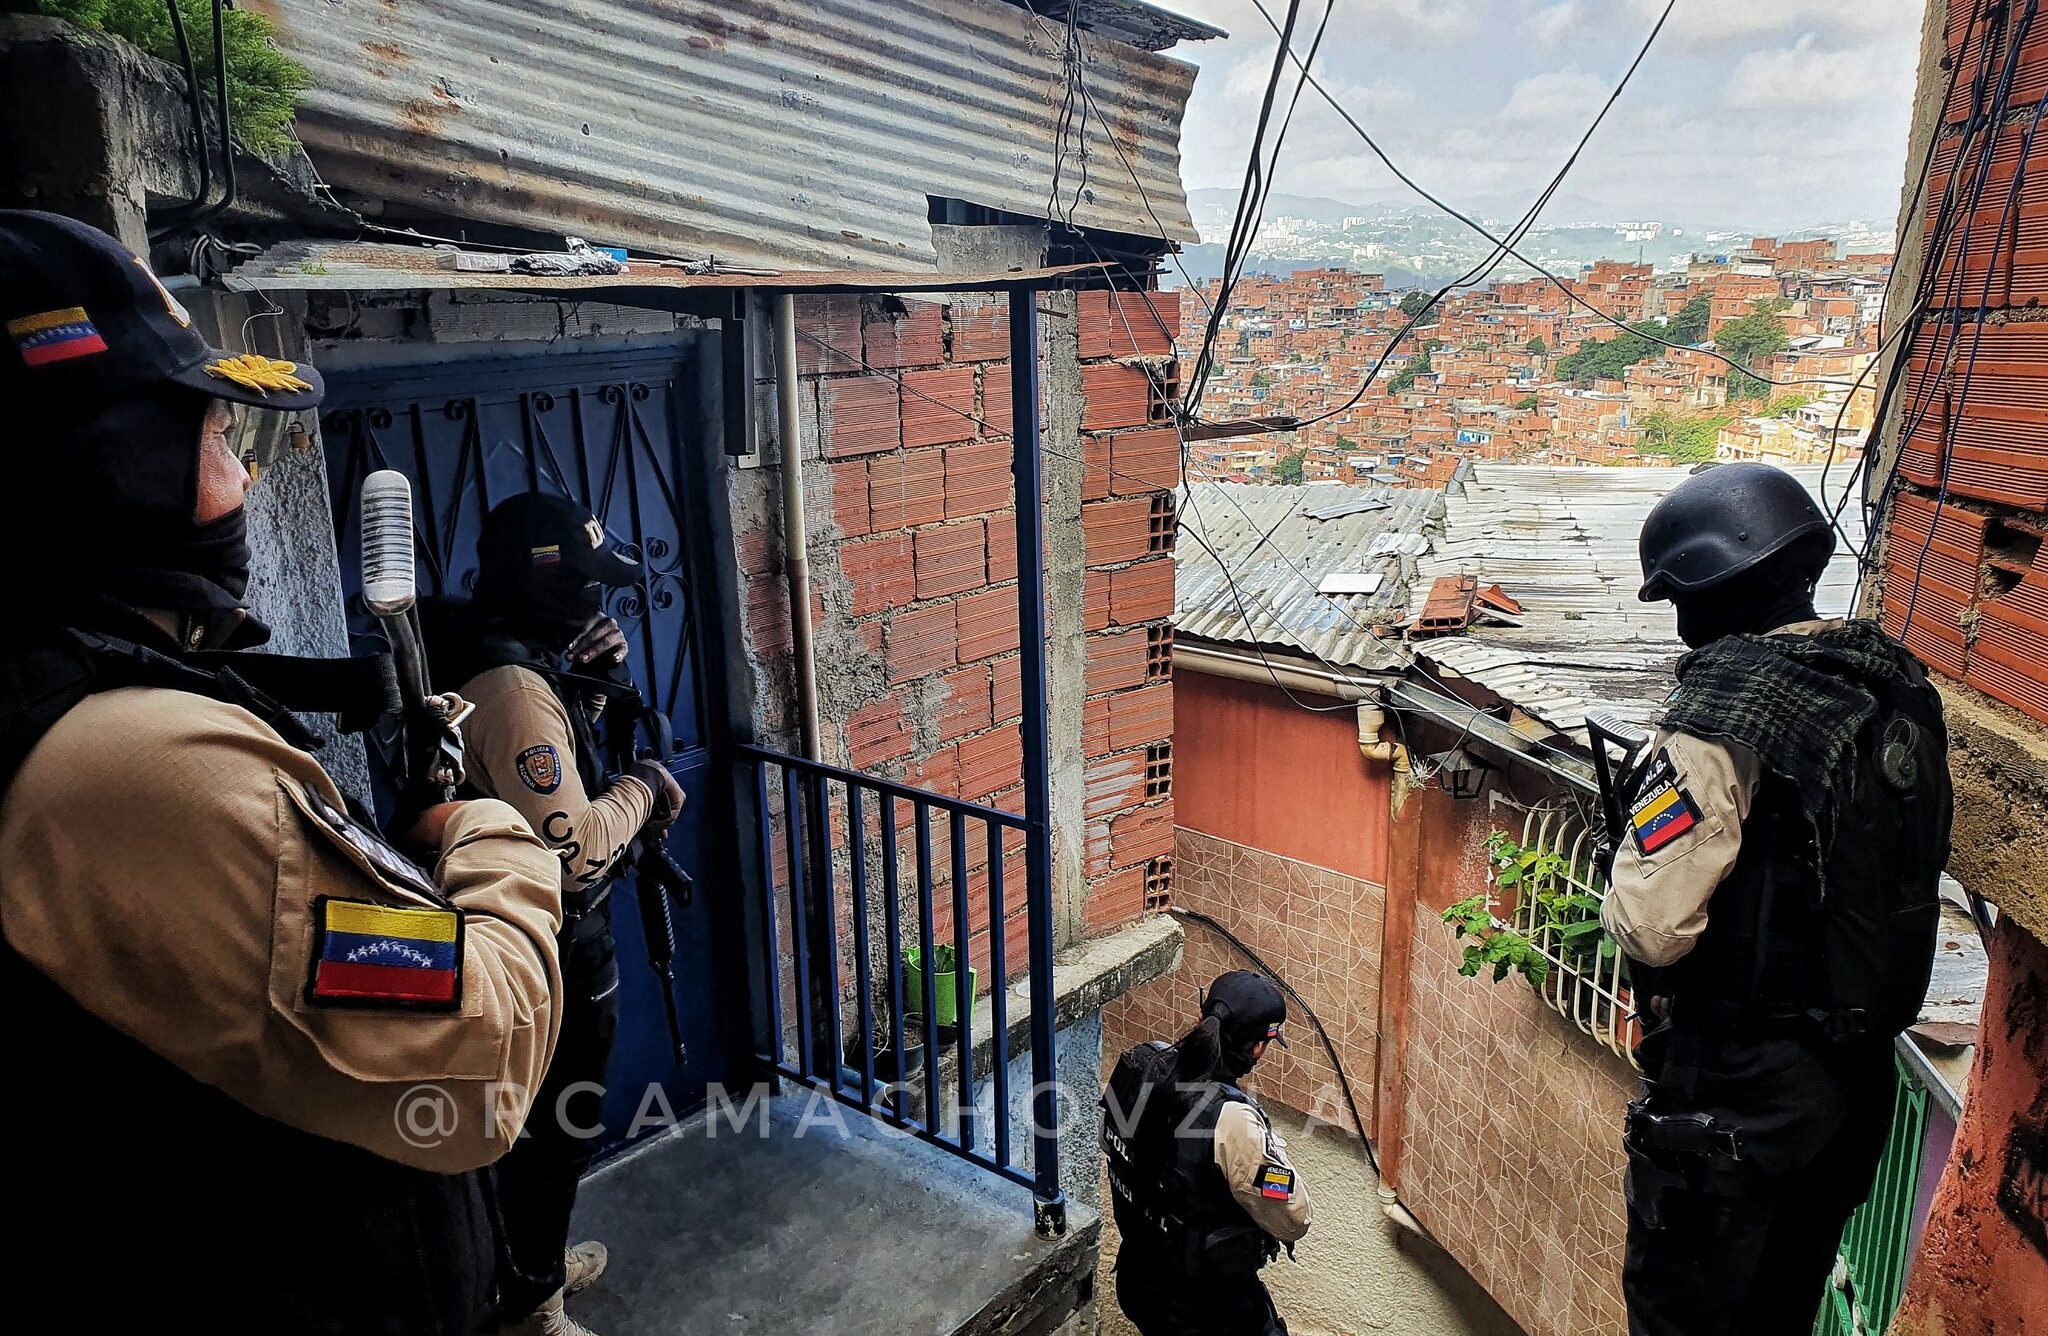 Operation Gran Cacique Guaicaipuro deployed in Petare (Caracas). Photo courtesy of Twitter / @RCamachoVzla